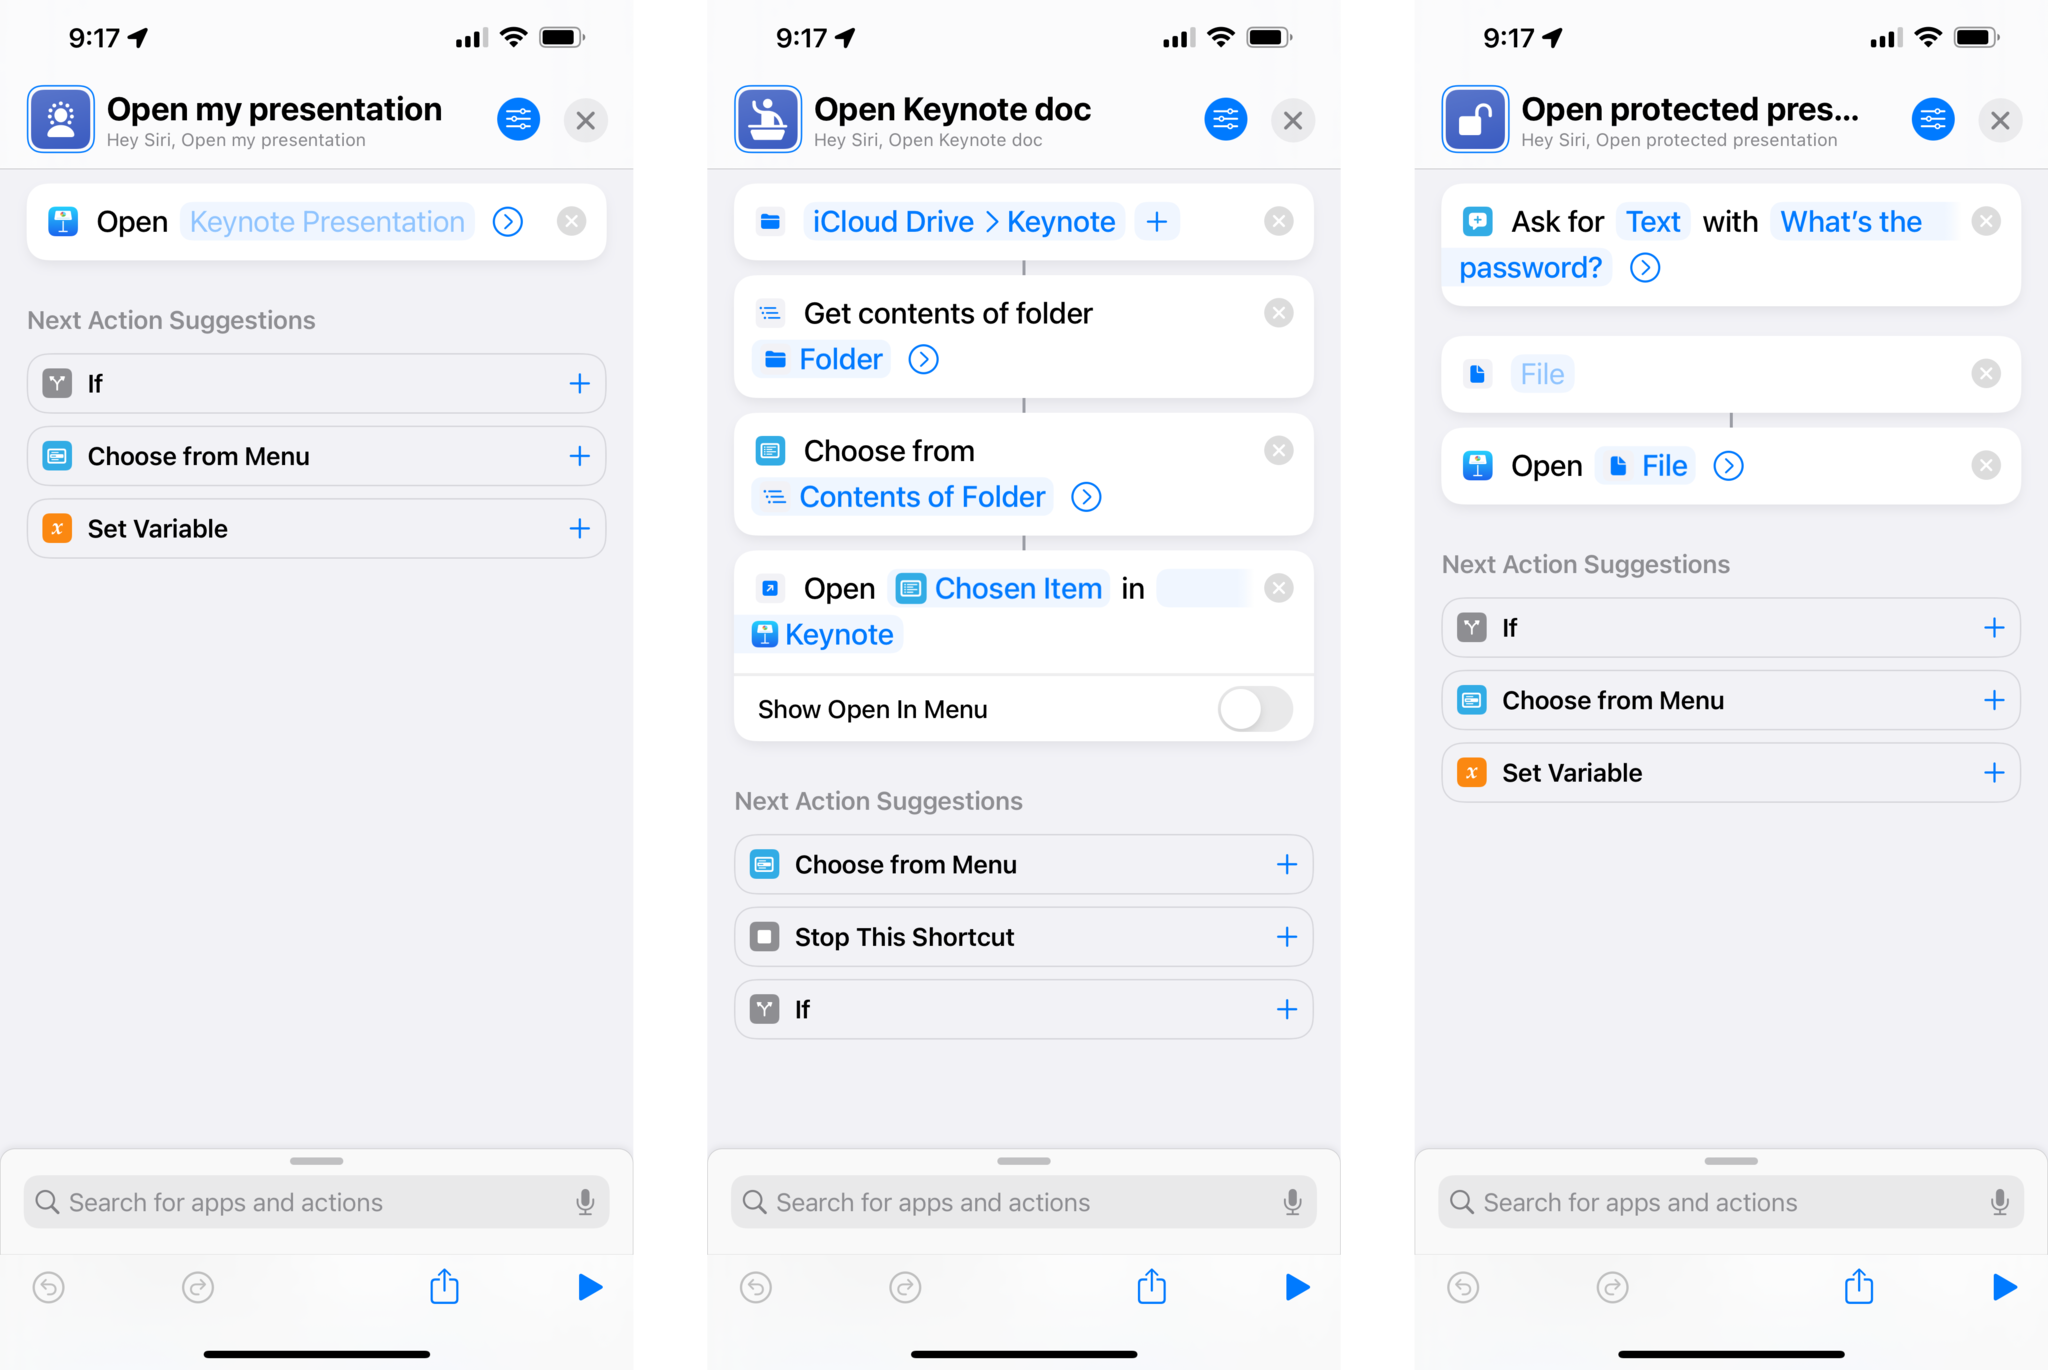 Screenshots showing how to use the Open Presentation action in Keynote for shortcuts.